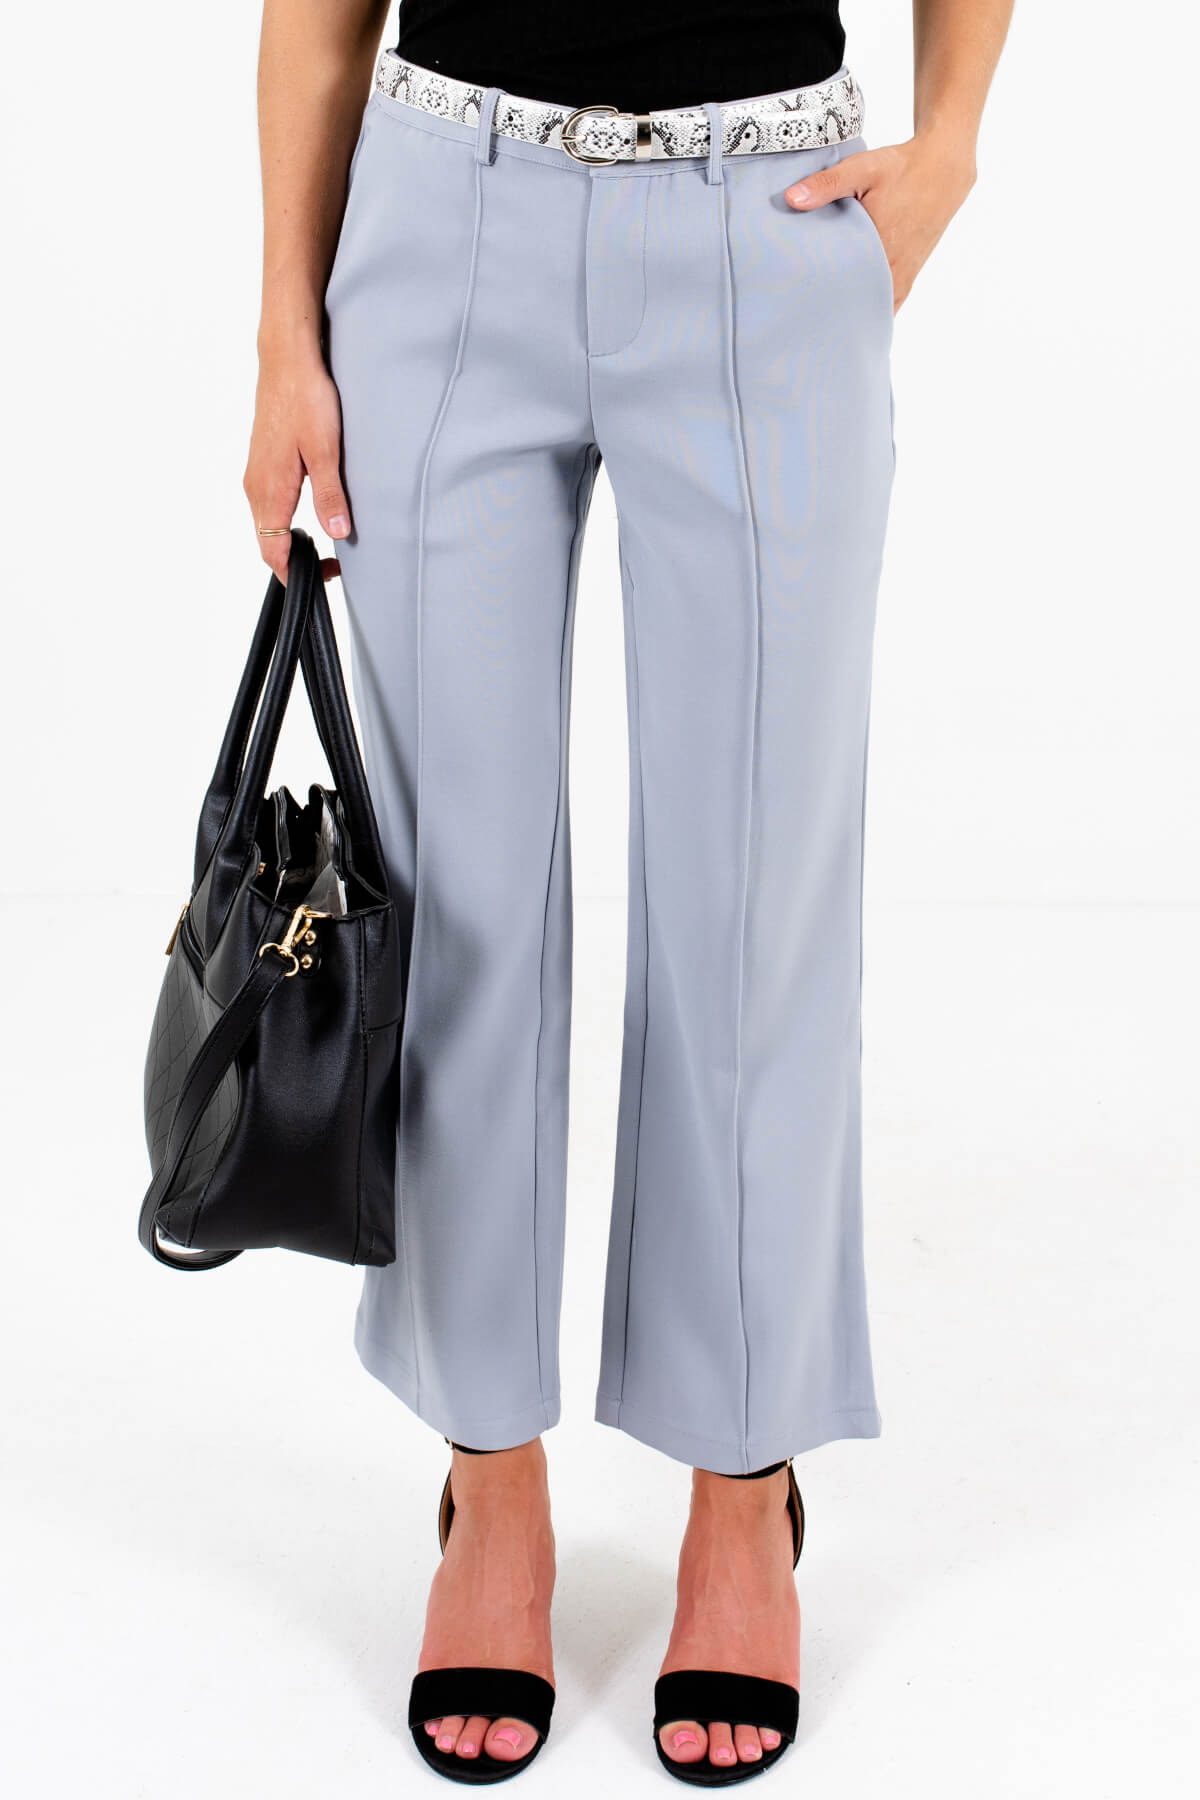 Taking Flare of Business High-Waisted Pants